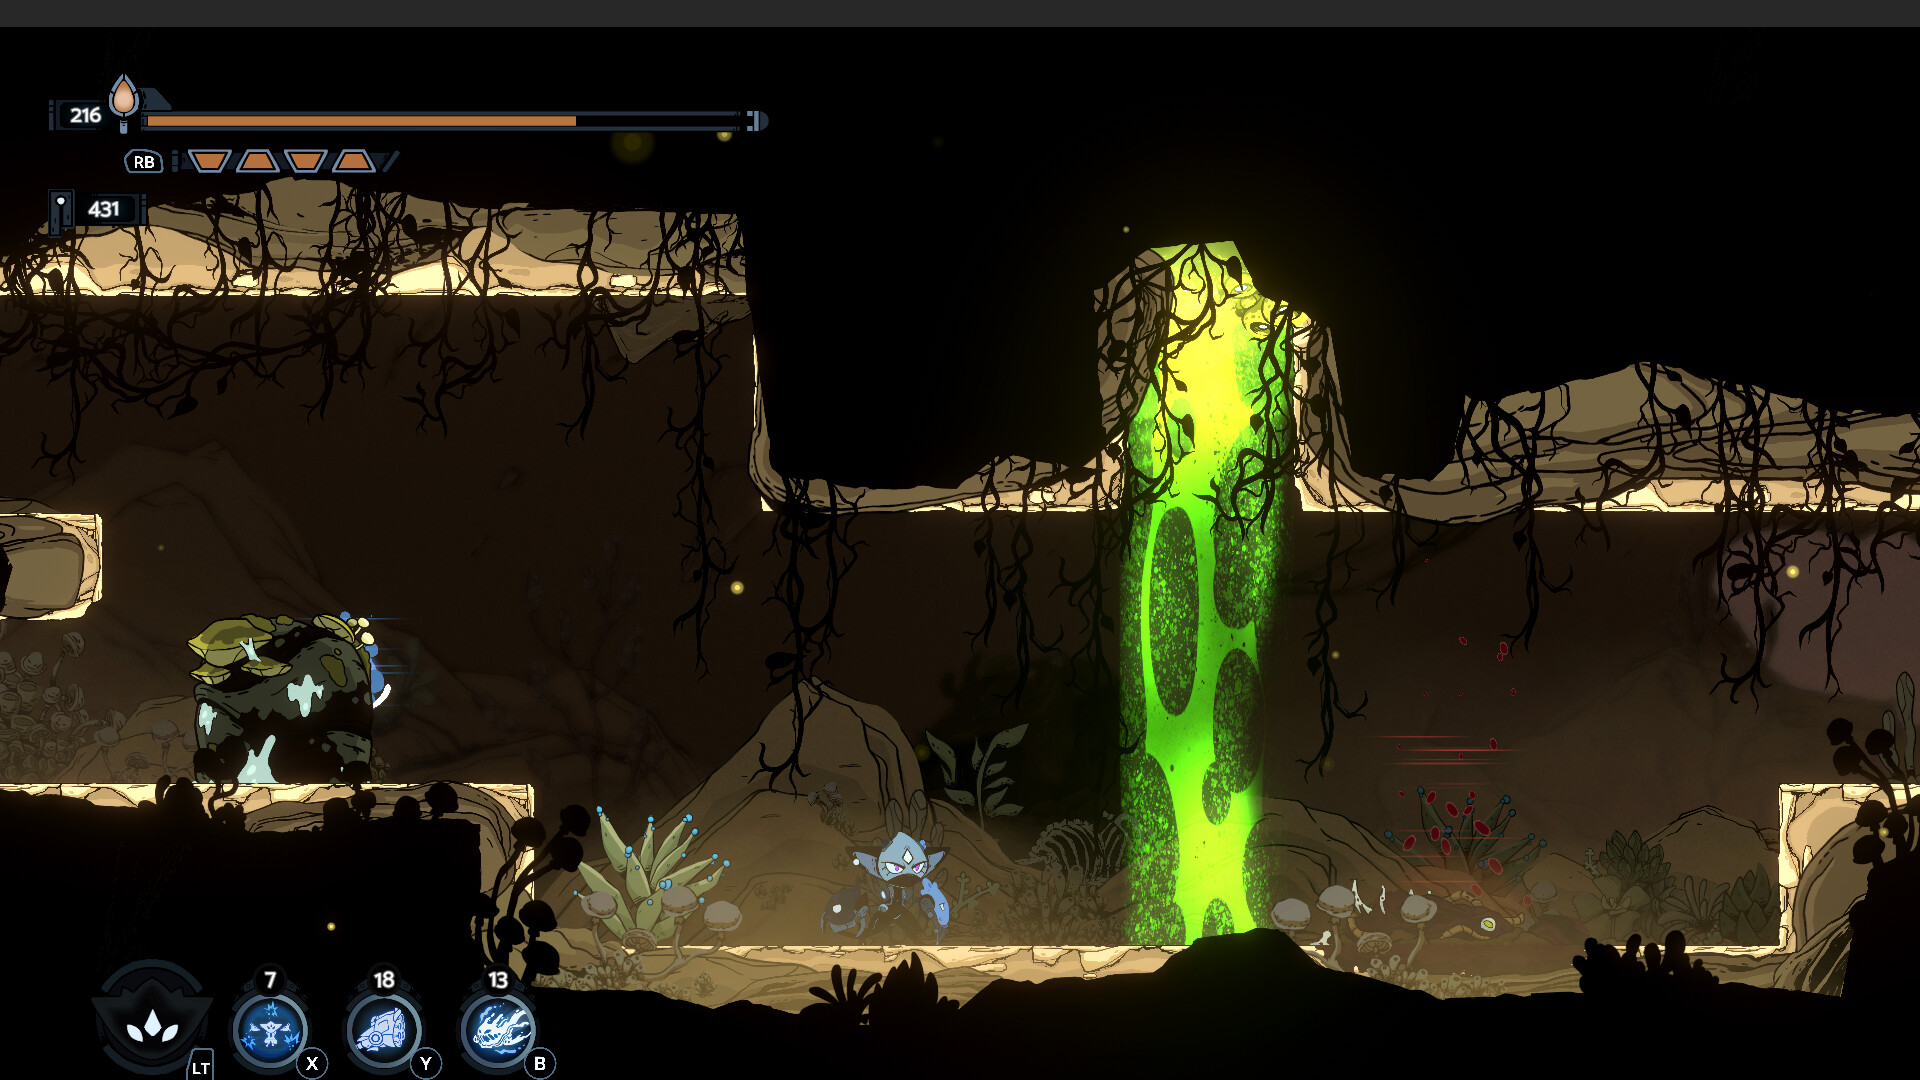 Biomorph (PC) Game Review - Biomorph (PC) Sound effects and ambiance